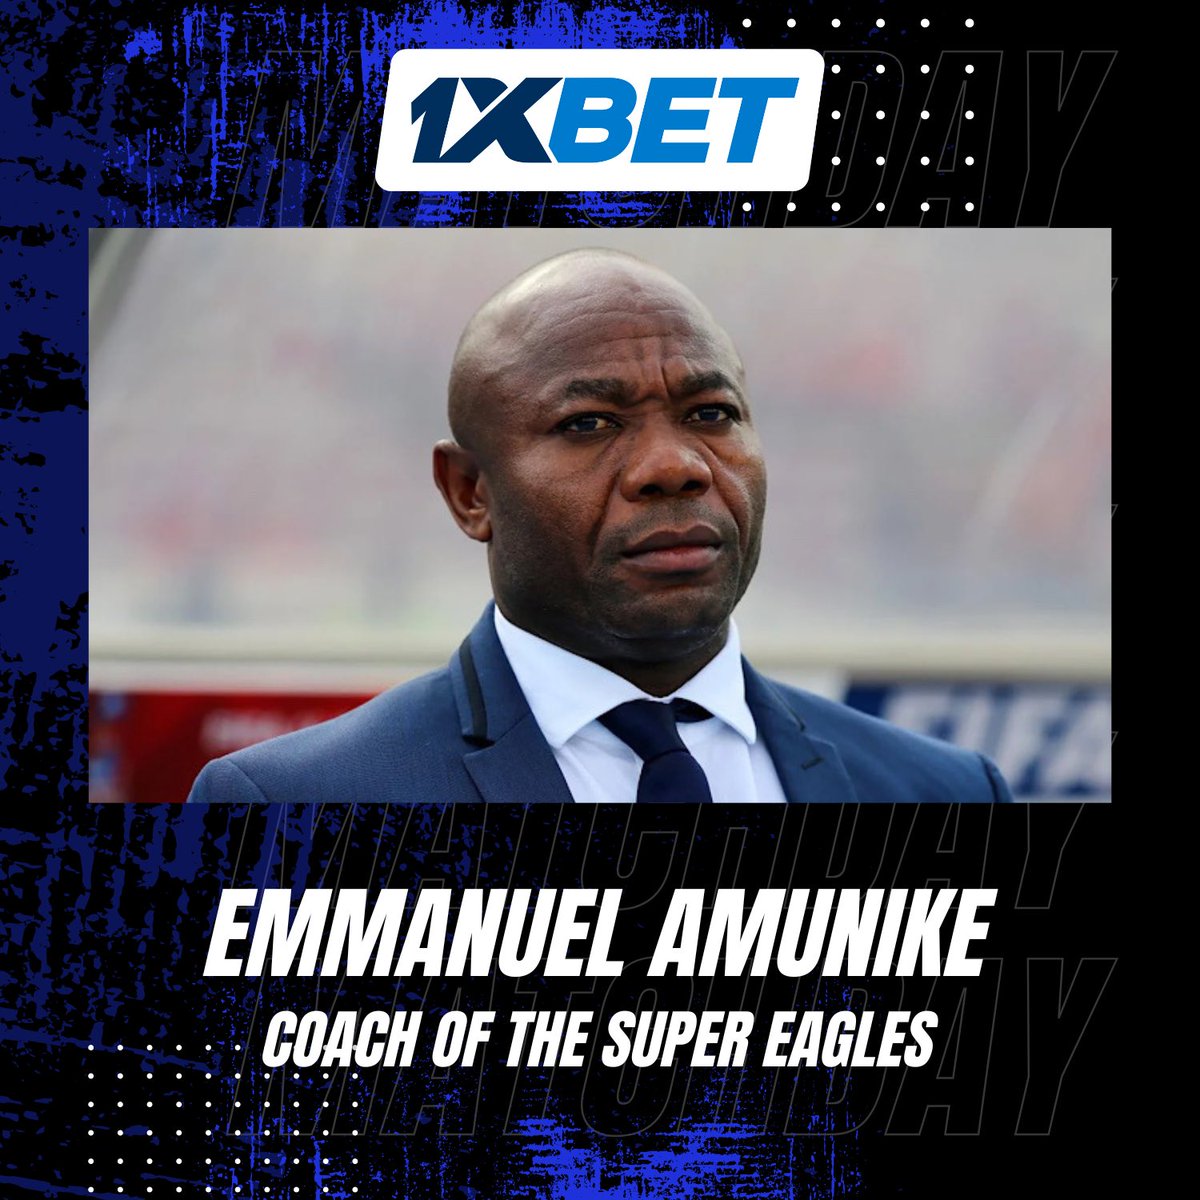 We're thrilled to announce that Emmanuel Amunike has been appointed as the new Head Coach of the Super Eagles! 🦅🇳🇬

Wishing you all the best of luck, sir! Let's go, Super Eagles! 💪🏾

#NigeriaFootball #SuperEagles #1xBetNigeria #EmmanuelAmunike #NewCoach